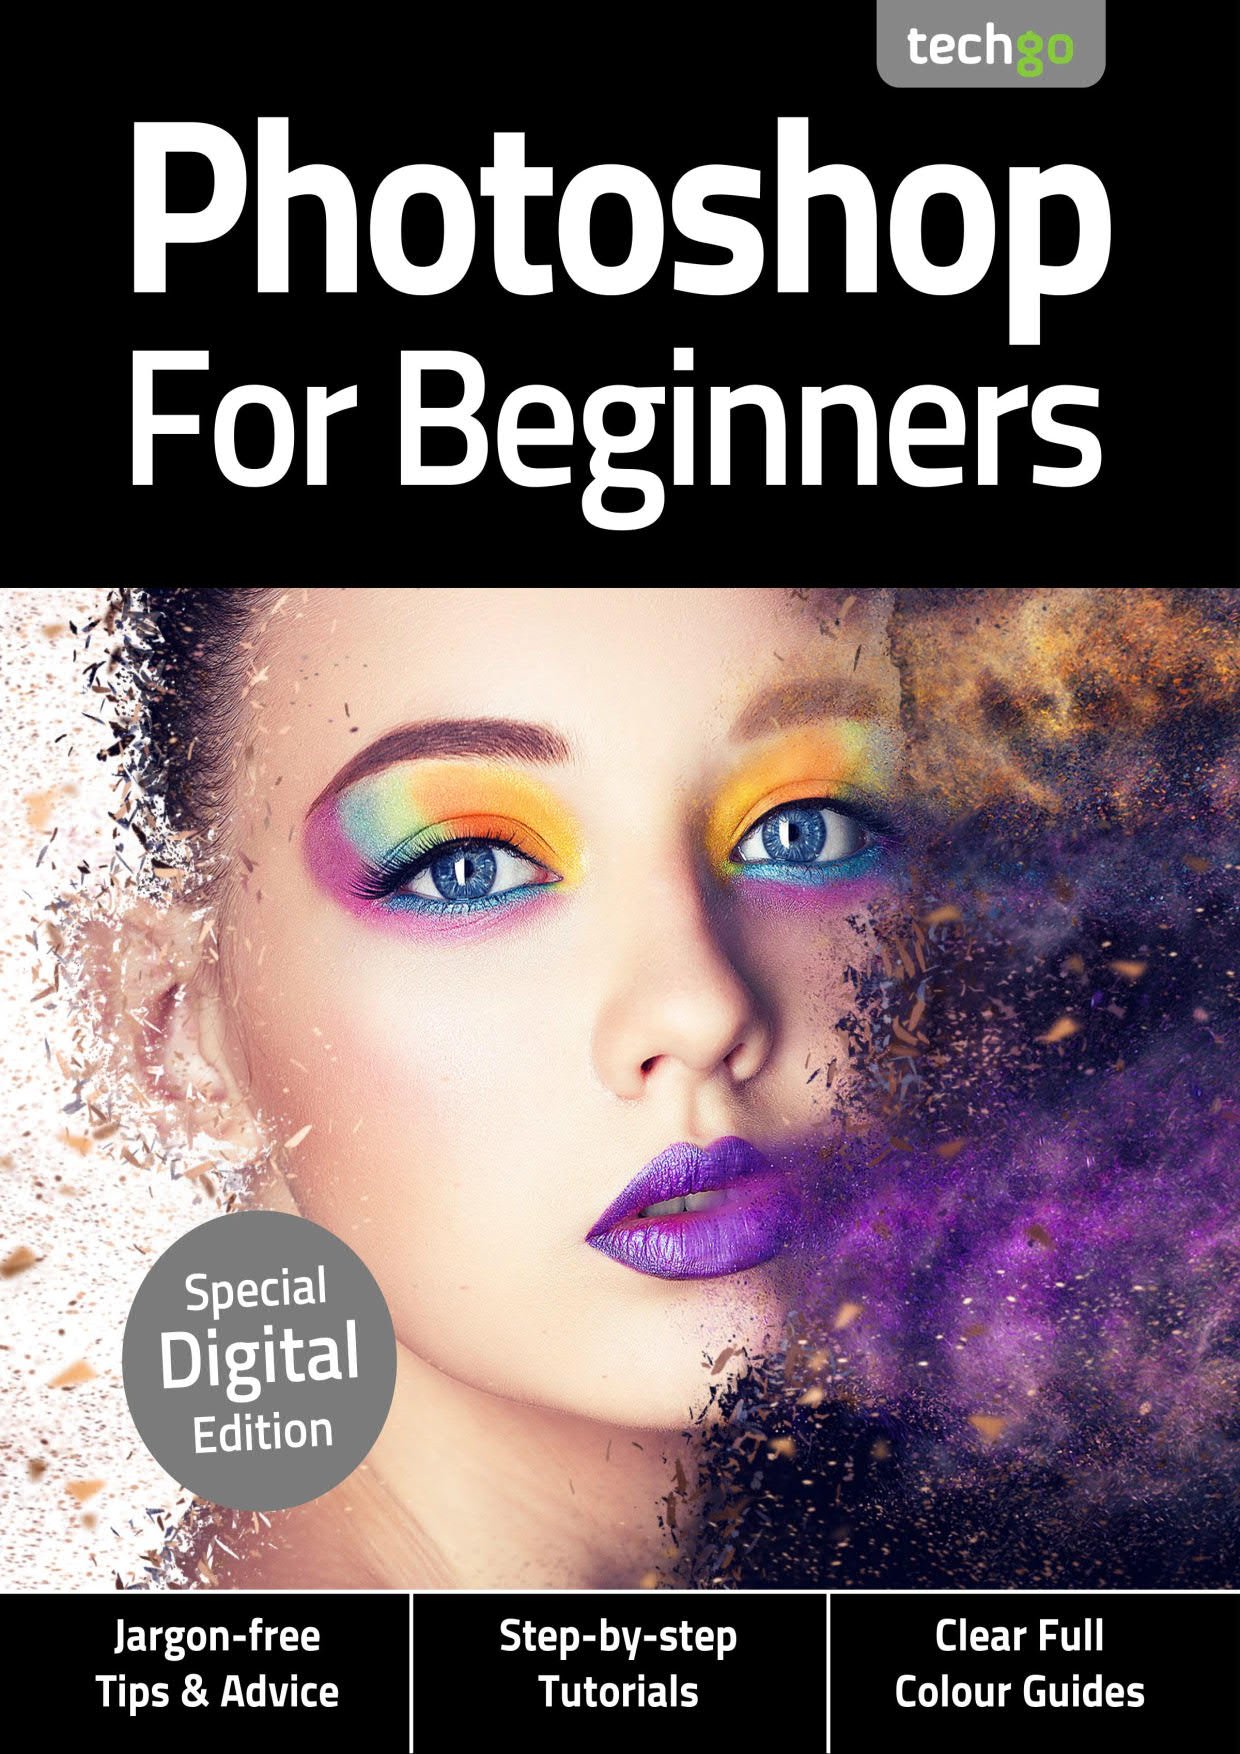 Photoshop For Beginners - 3rd Edition 2020 - SoftArchive